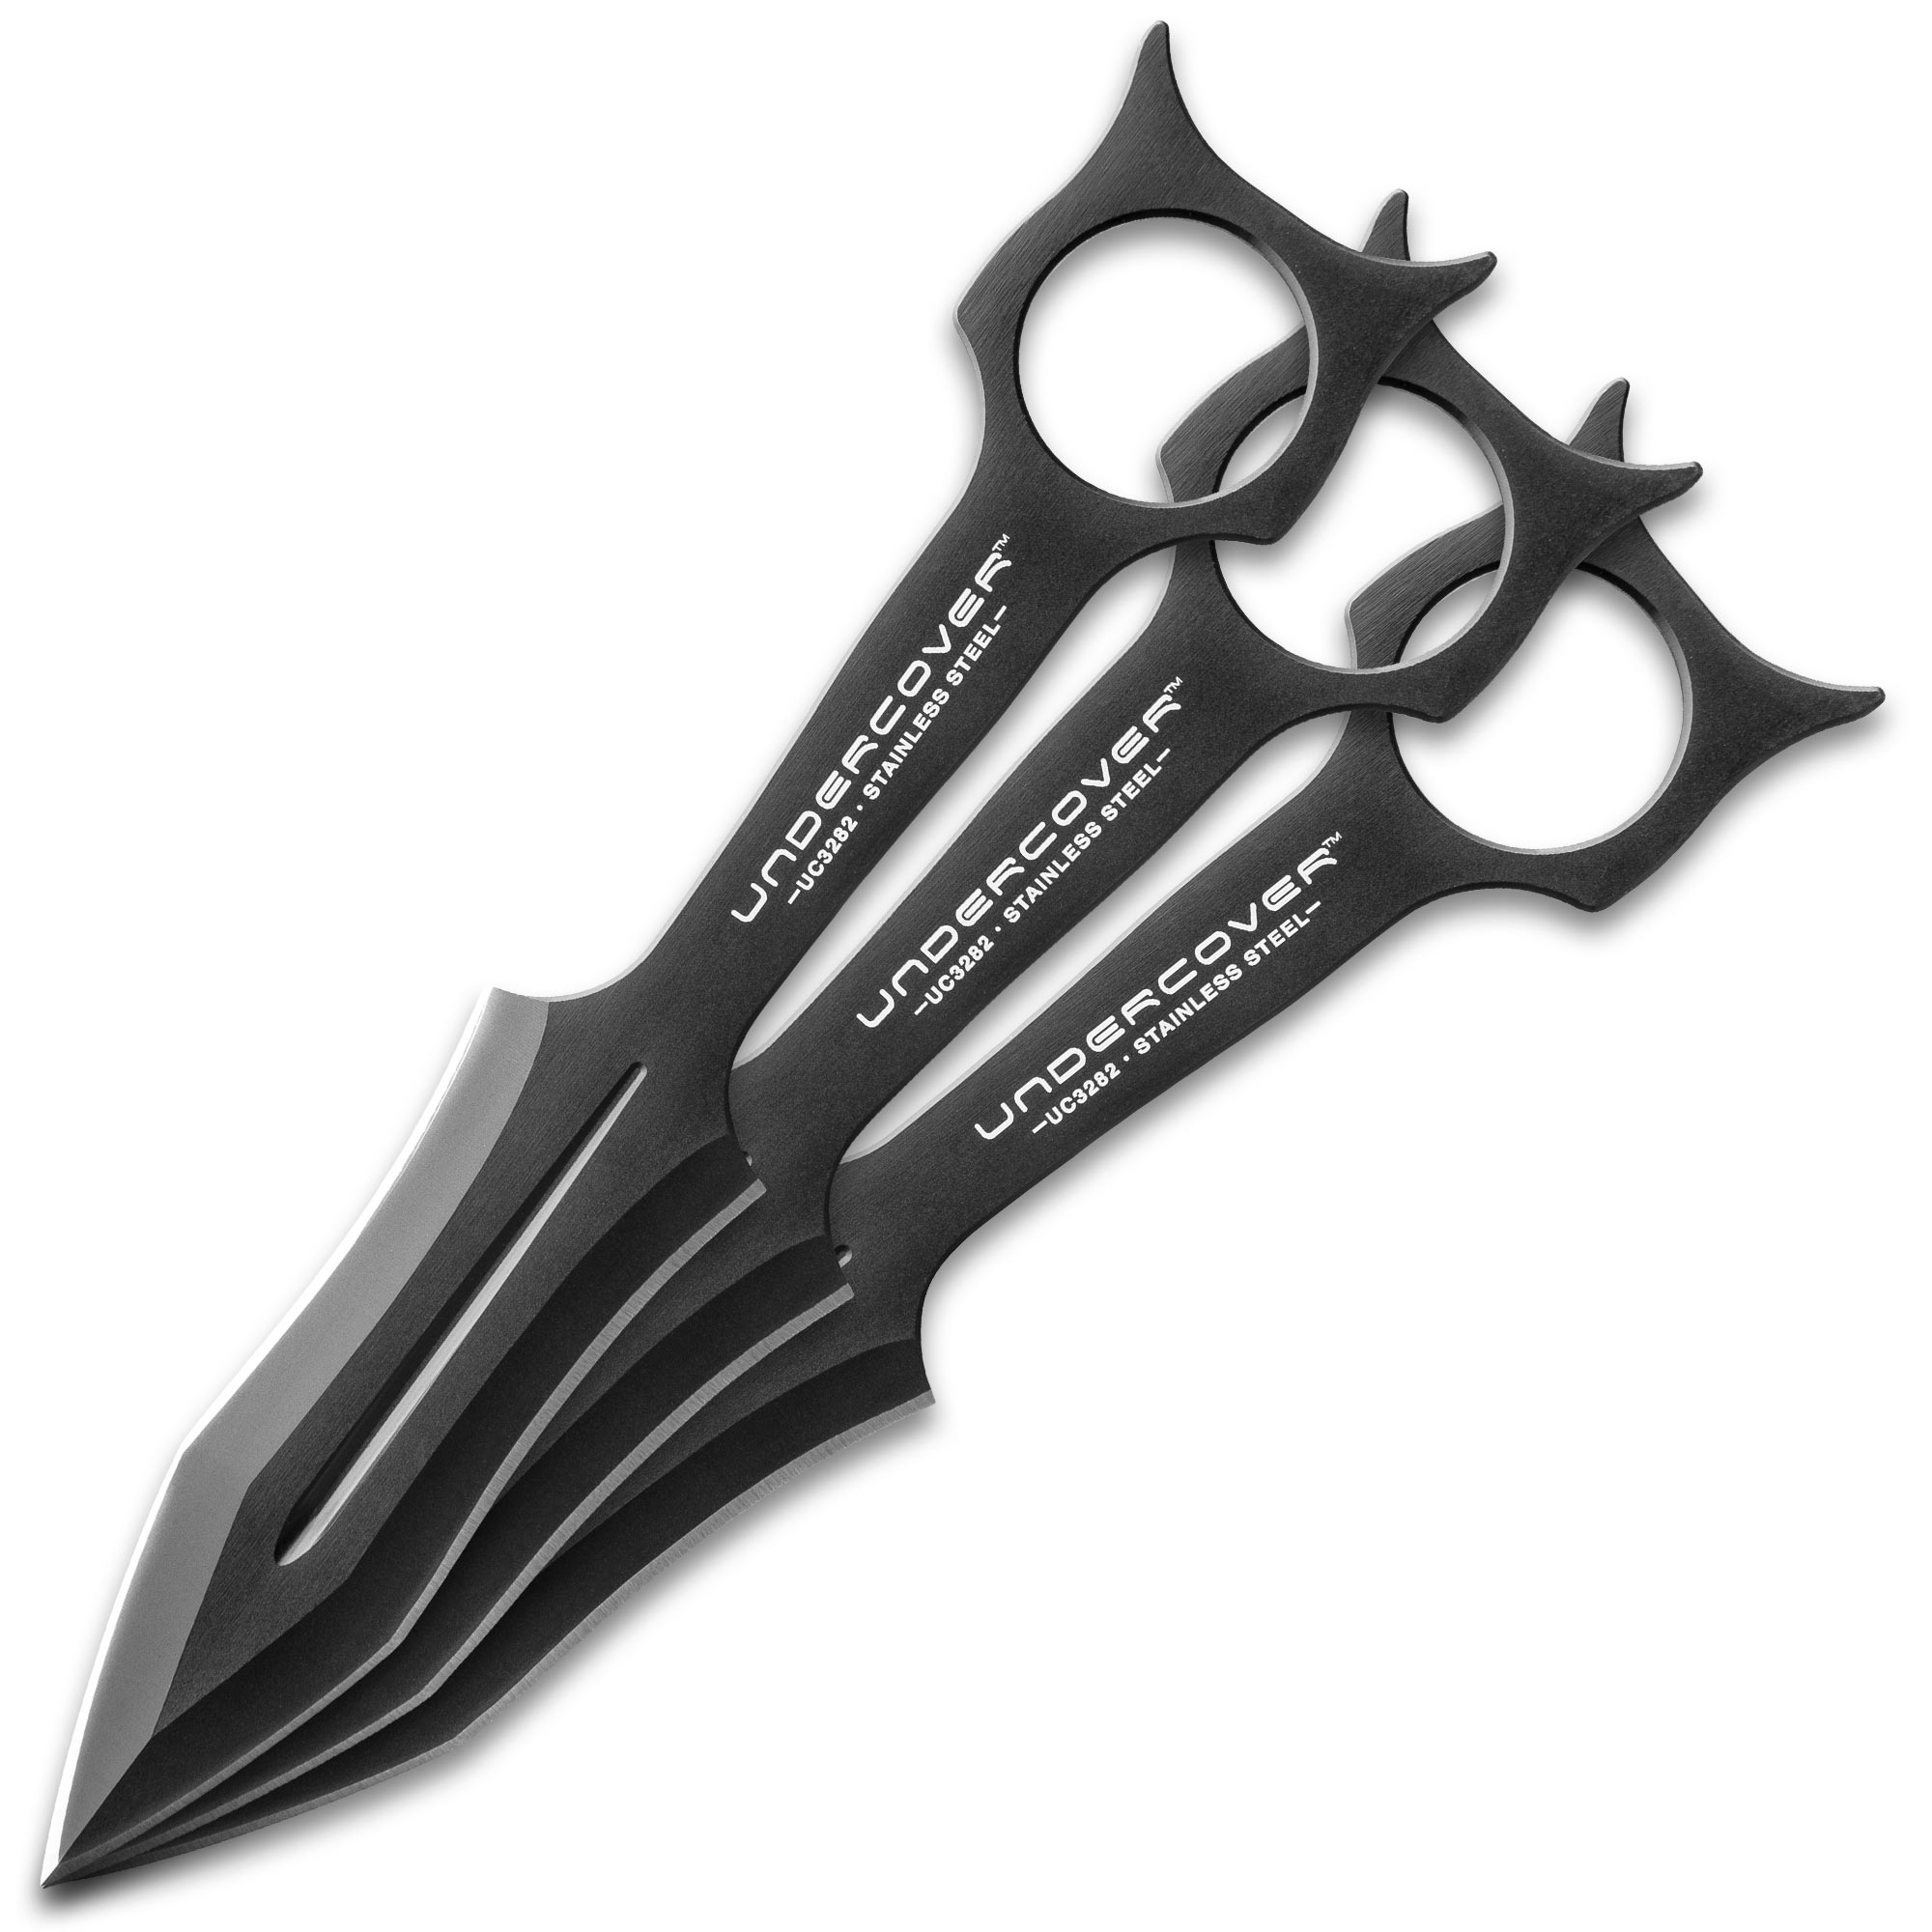 This is the Set of 3 Stainless Steel Anime Ninja Kunai with Sheath. The  blade of the Kunai have been constructed from 440 Stainless Steel with a  black finish. This listing is